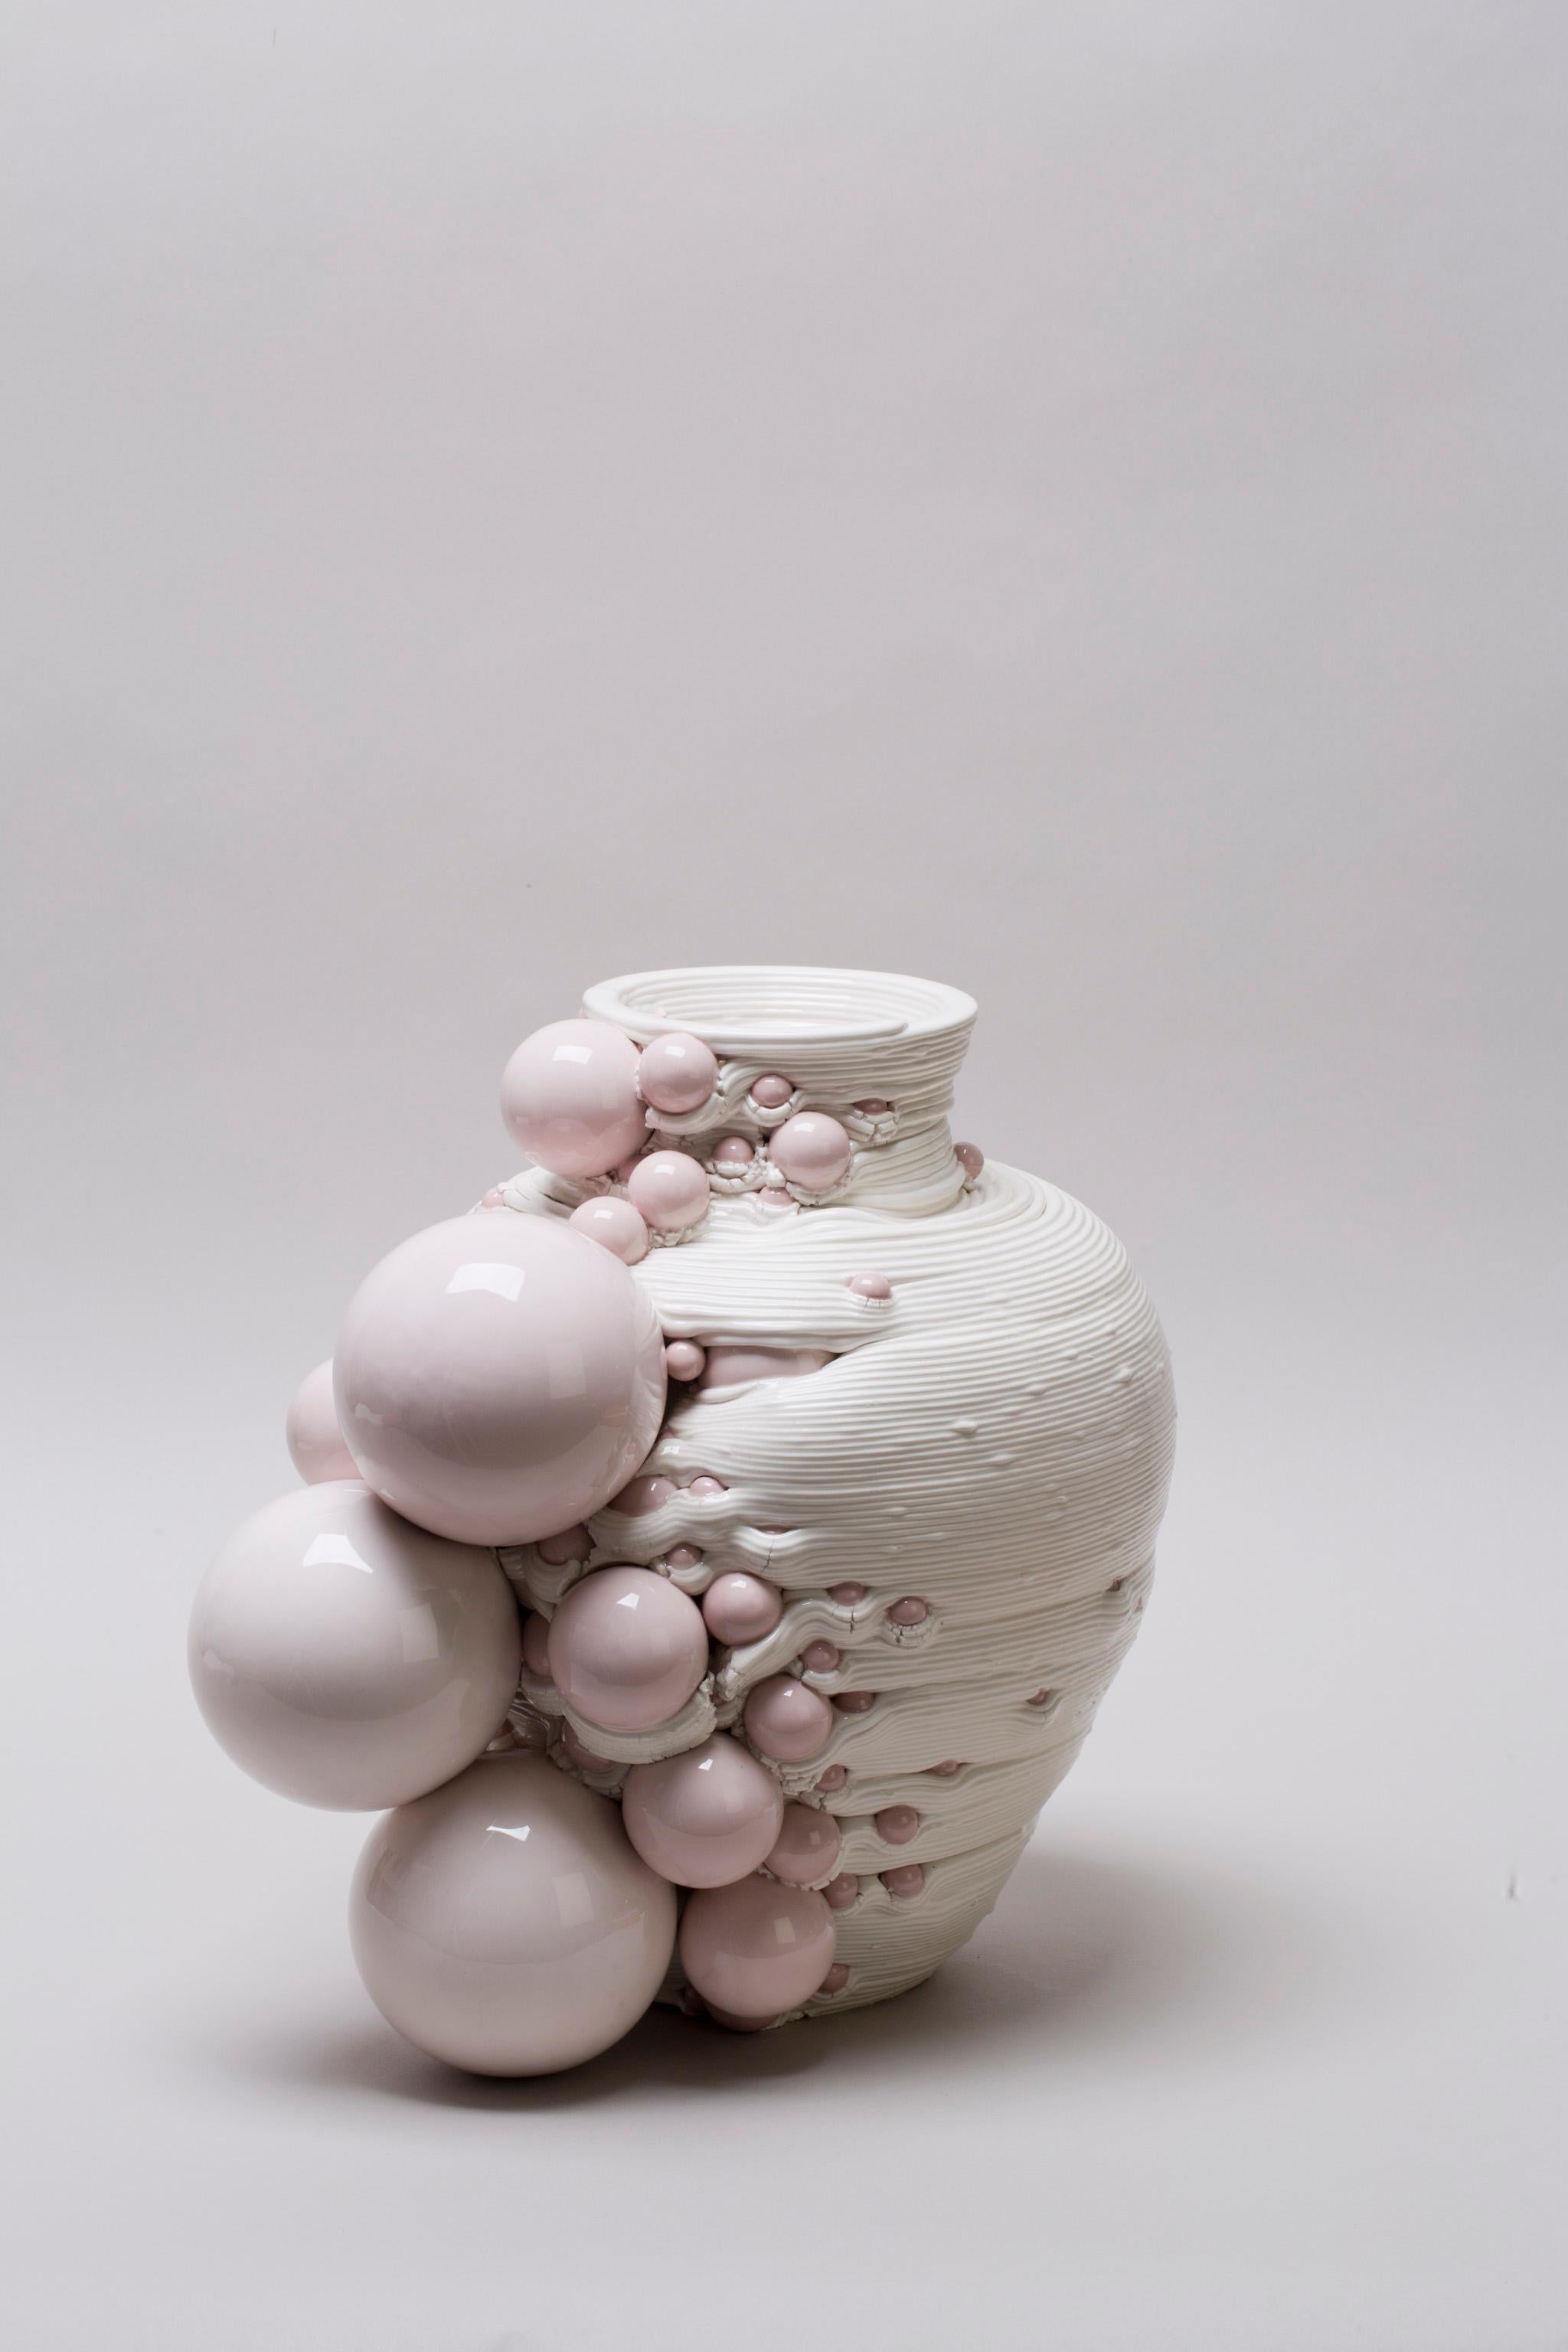 White 3D Printed Ceramic Sculptural Vase Italy Contemporary, 21st Century For Sale 8